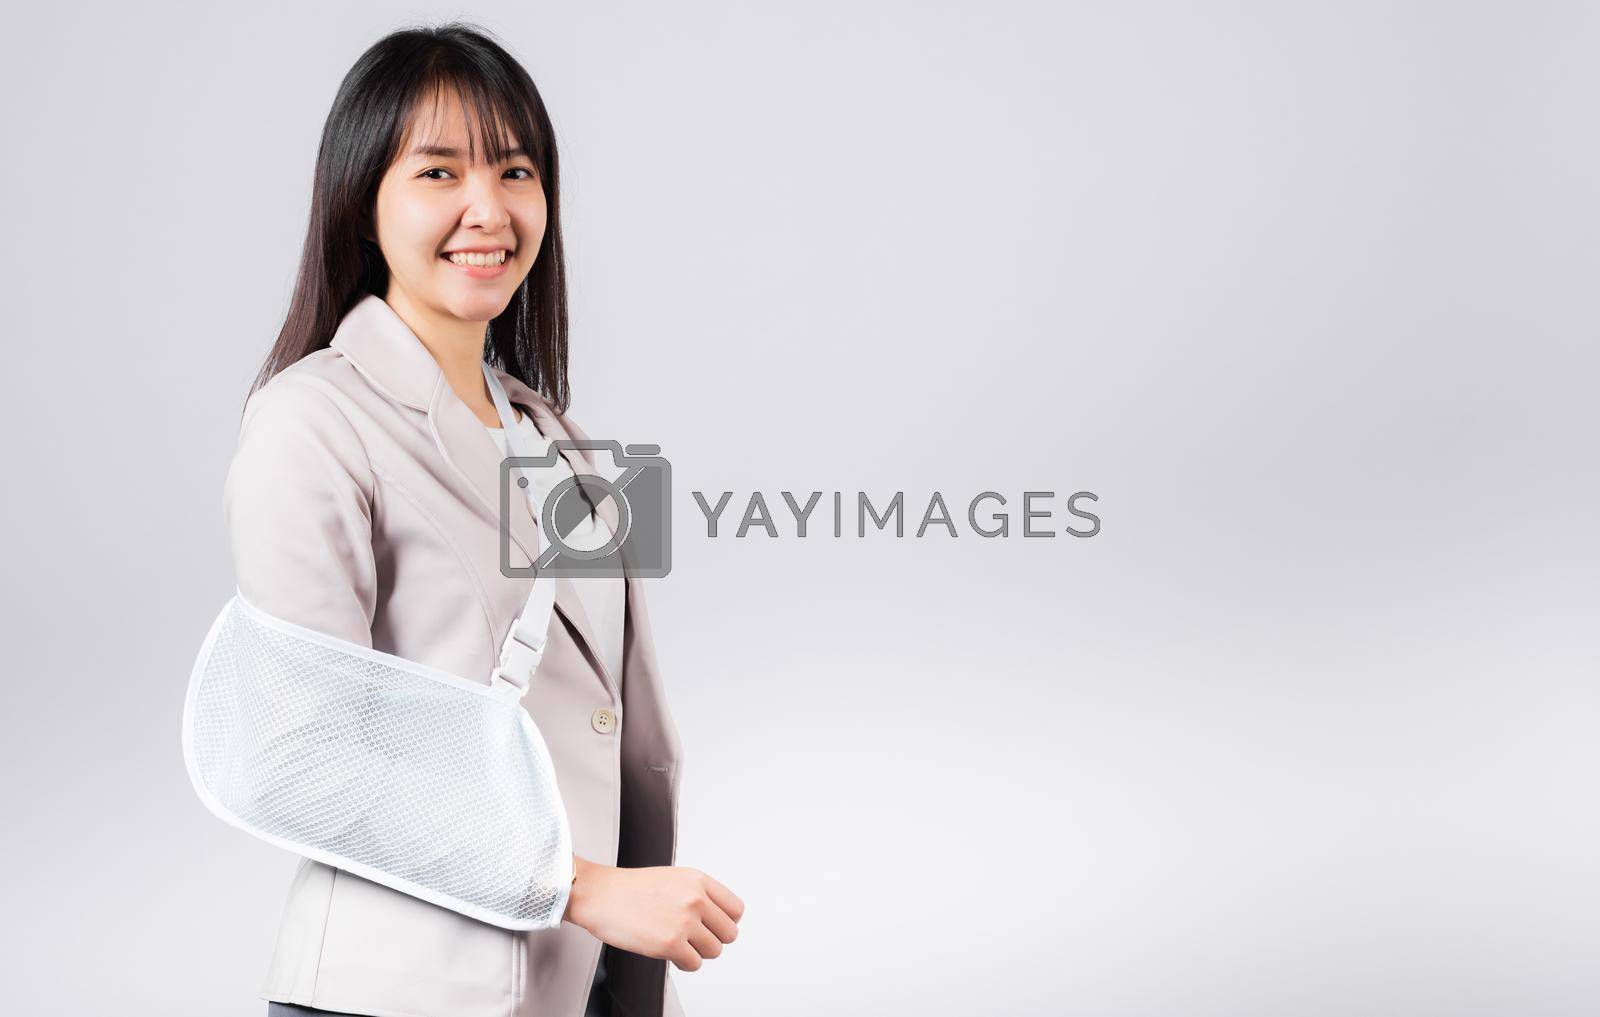 Royalty free image of Business woman confident smiling broken arm after accident and wear arm splint for treatment by Sorapop